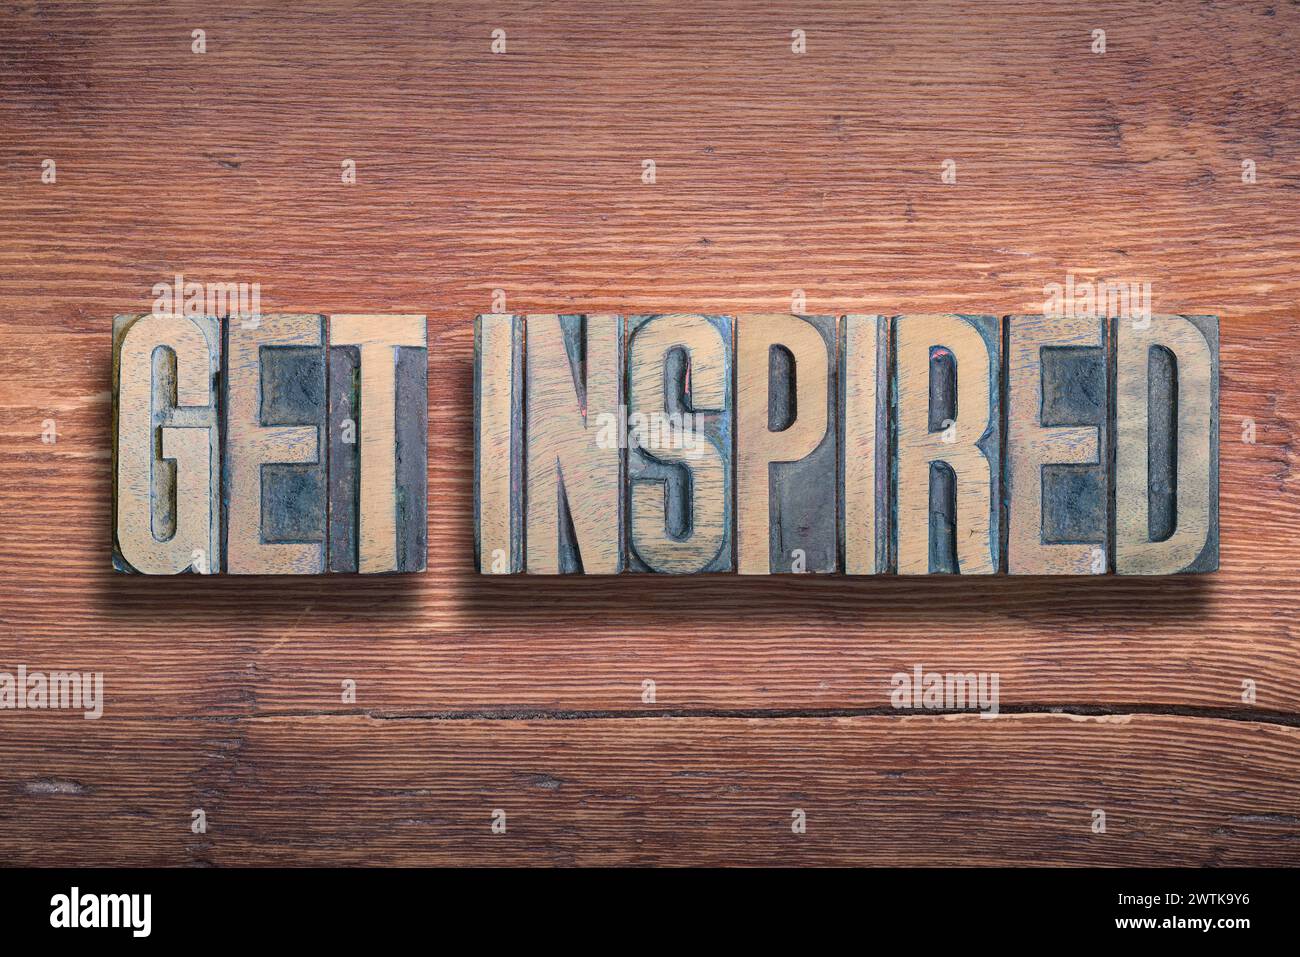 get inspired phrase combined on vintage varnished wooden surface Stock Photo